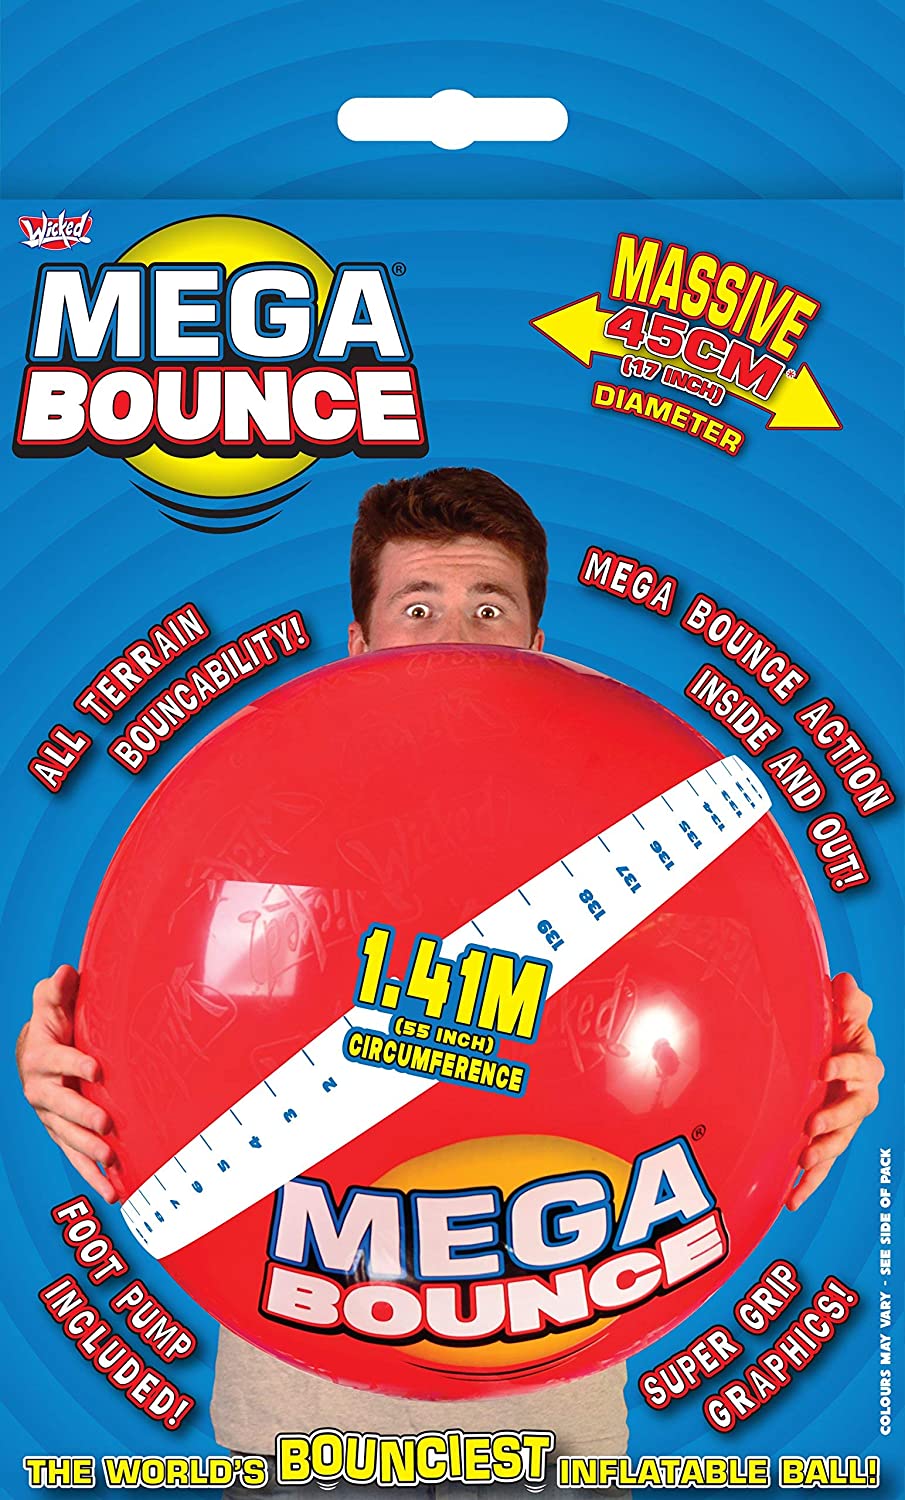 Wicked Mega Bounce Junior Inflatable Bouncy Ball